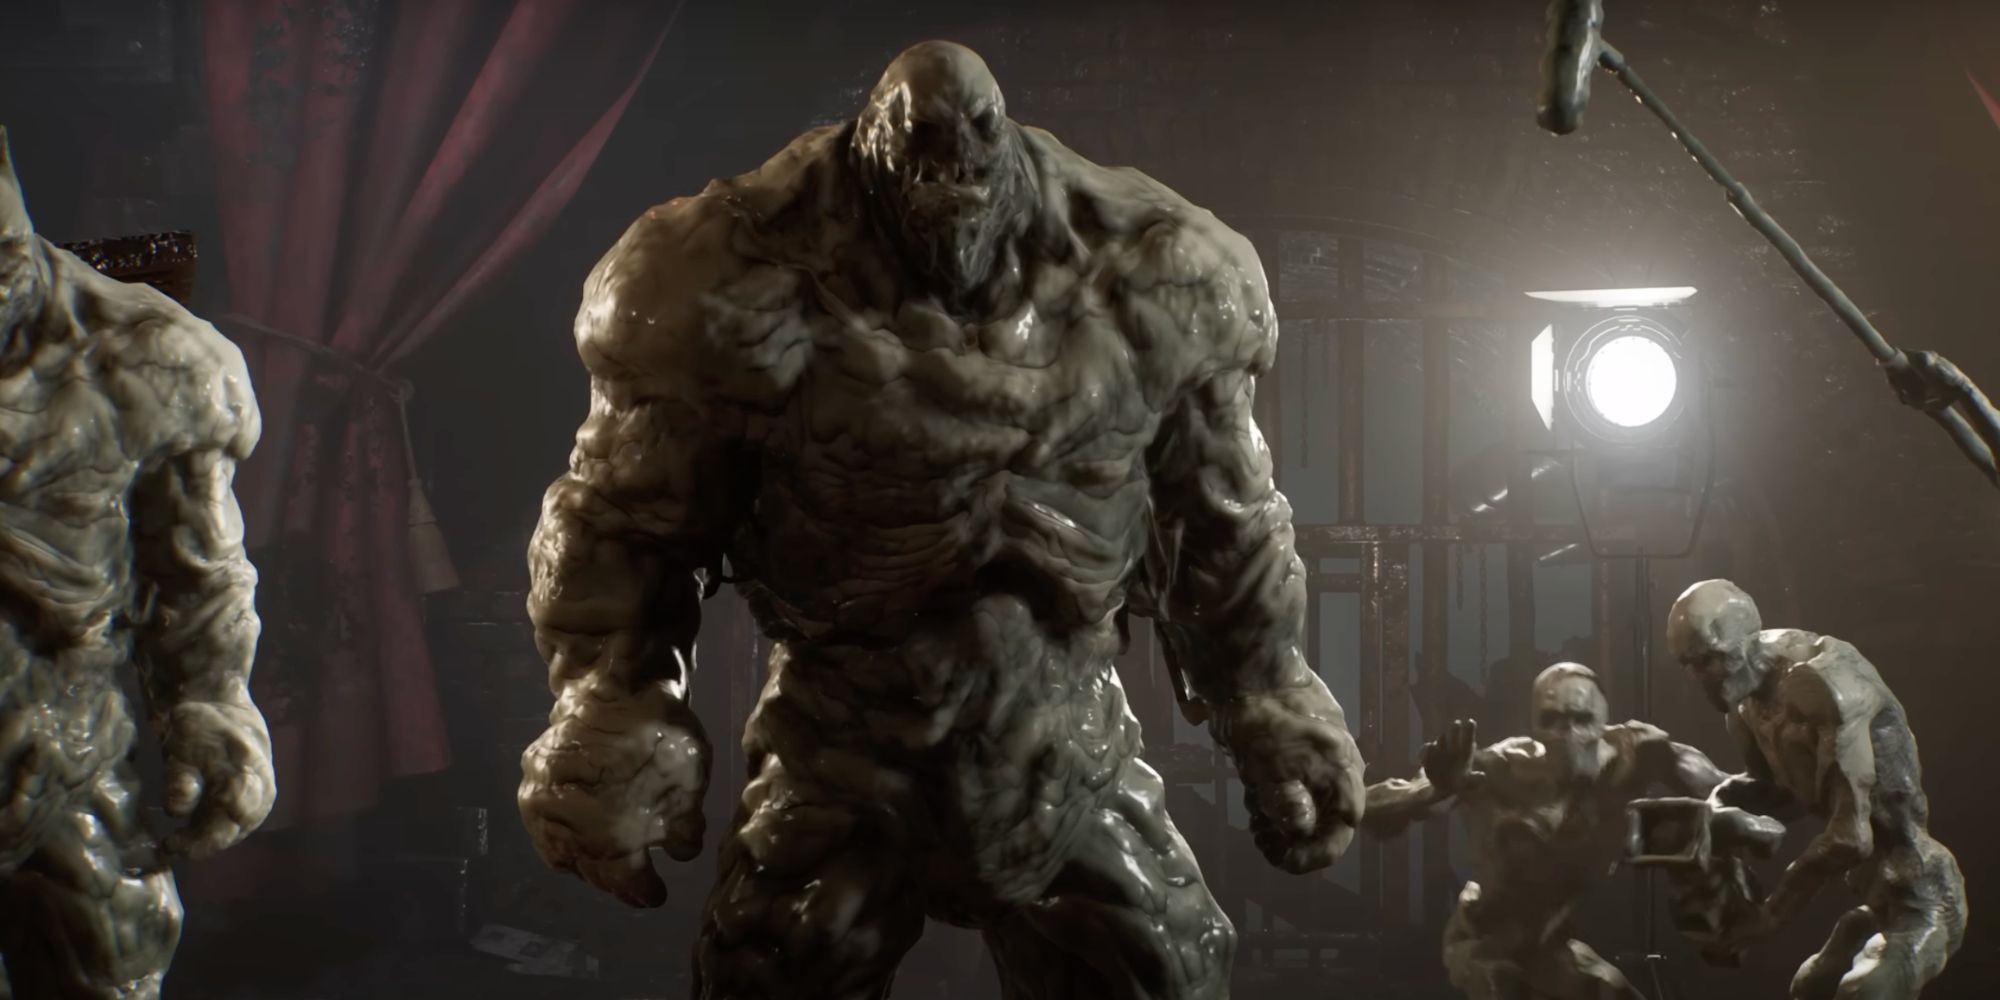 gotham knights clayface boss battle image with Clay fave ready to charge and other versions of his clay self in the background preparing to capture footage of him